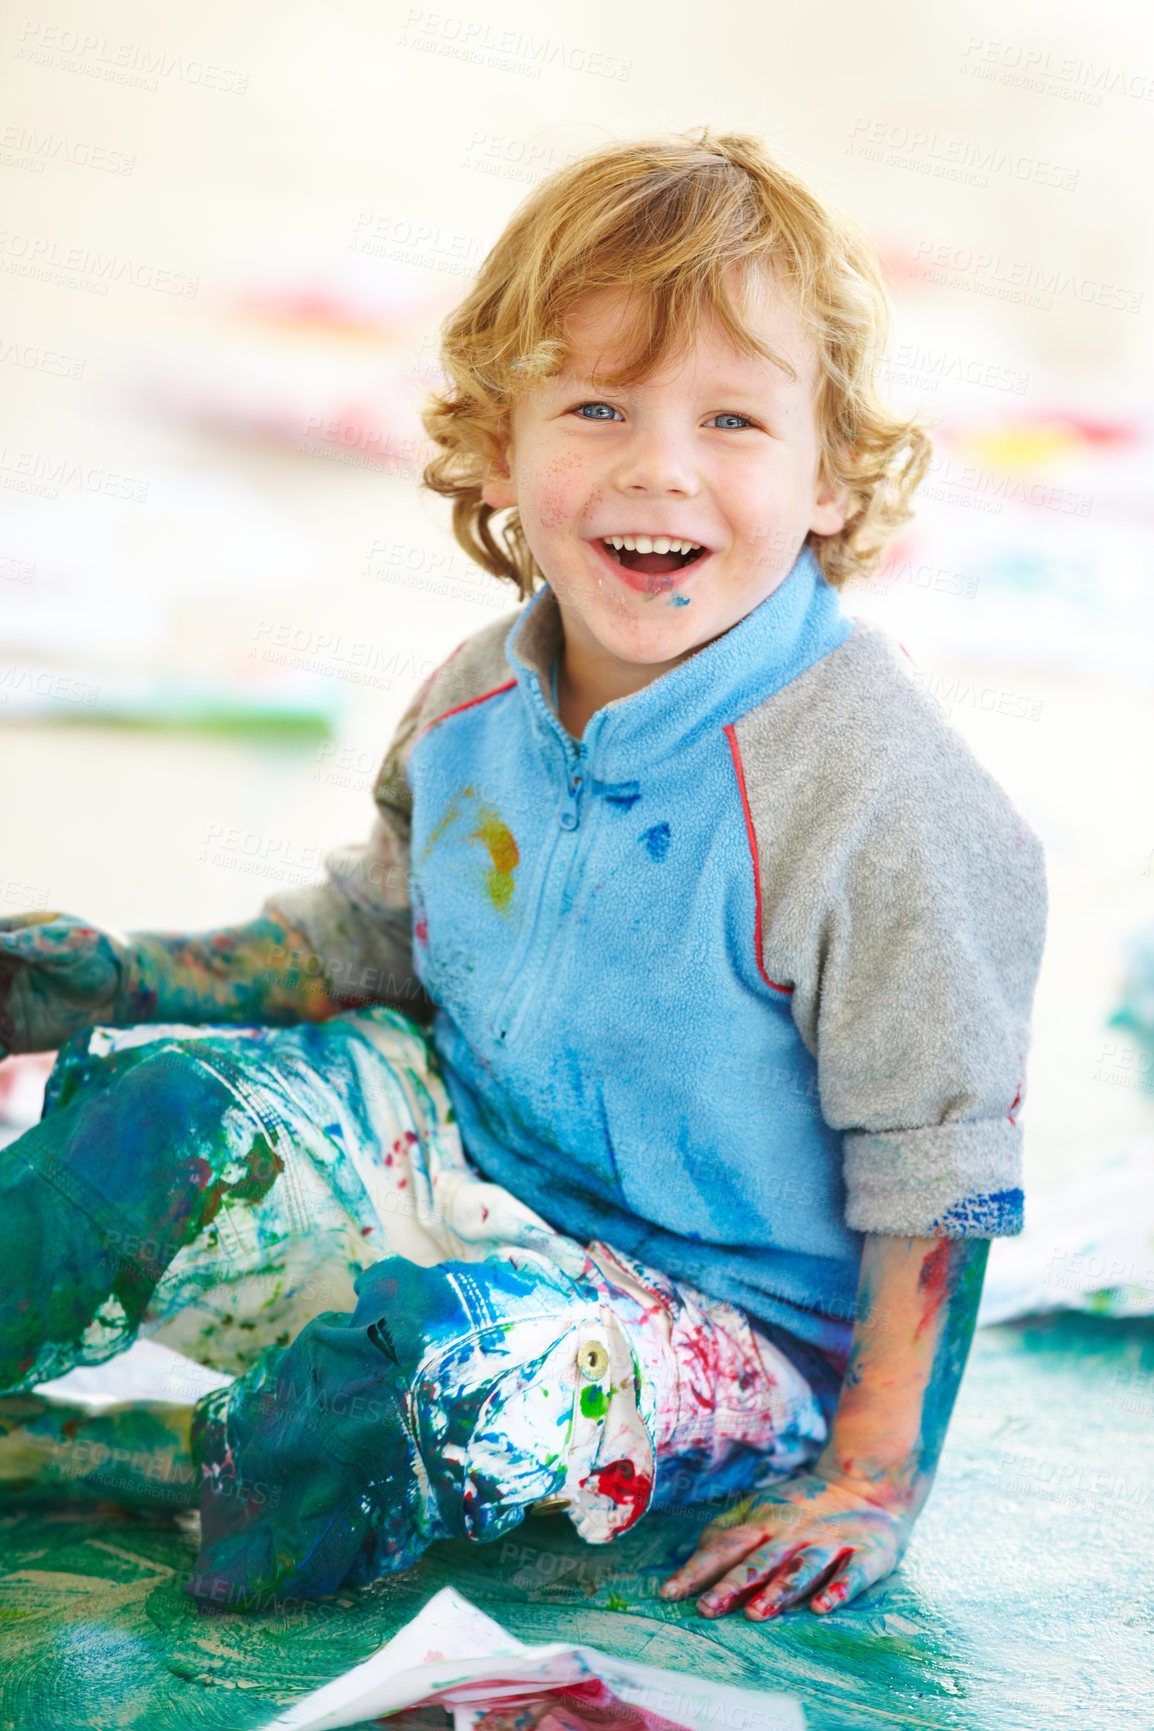 Buy stock photo Portrait, art and a boy painting on the floor of a studio for creative expression or education at school. Smile, paint and an excited young child looking happy with his messy artistic creativity